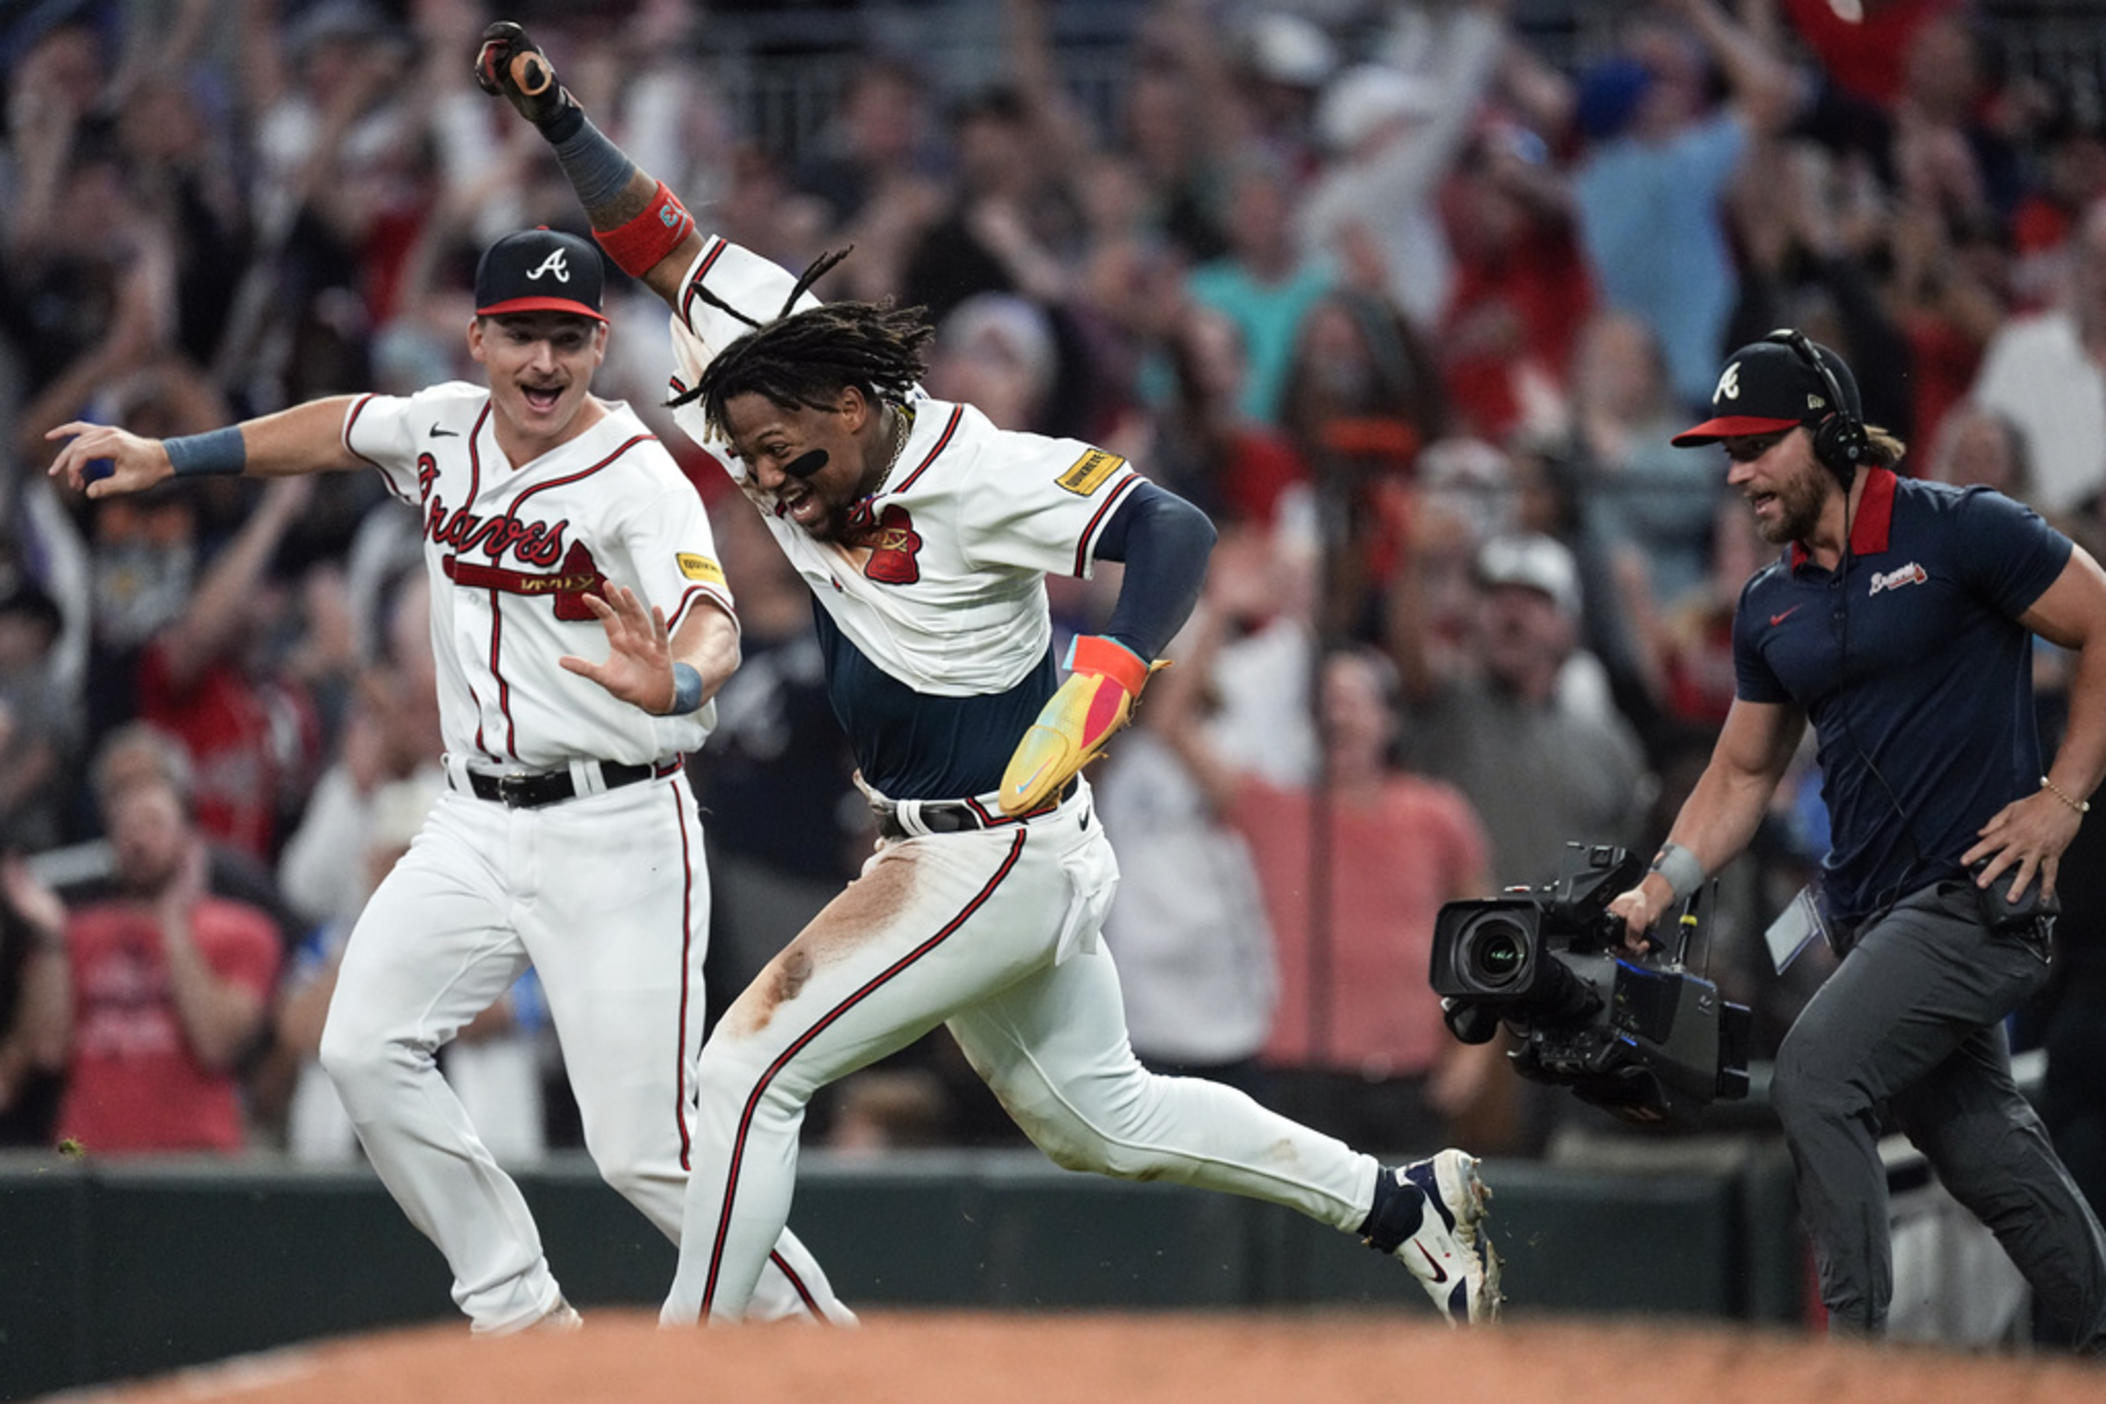 Stealing the show: Acuña leads speedsters seeking October impact